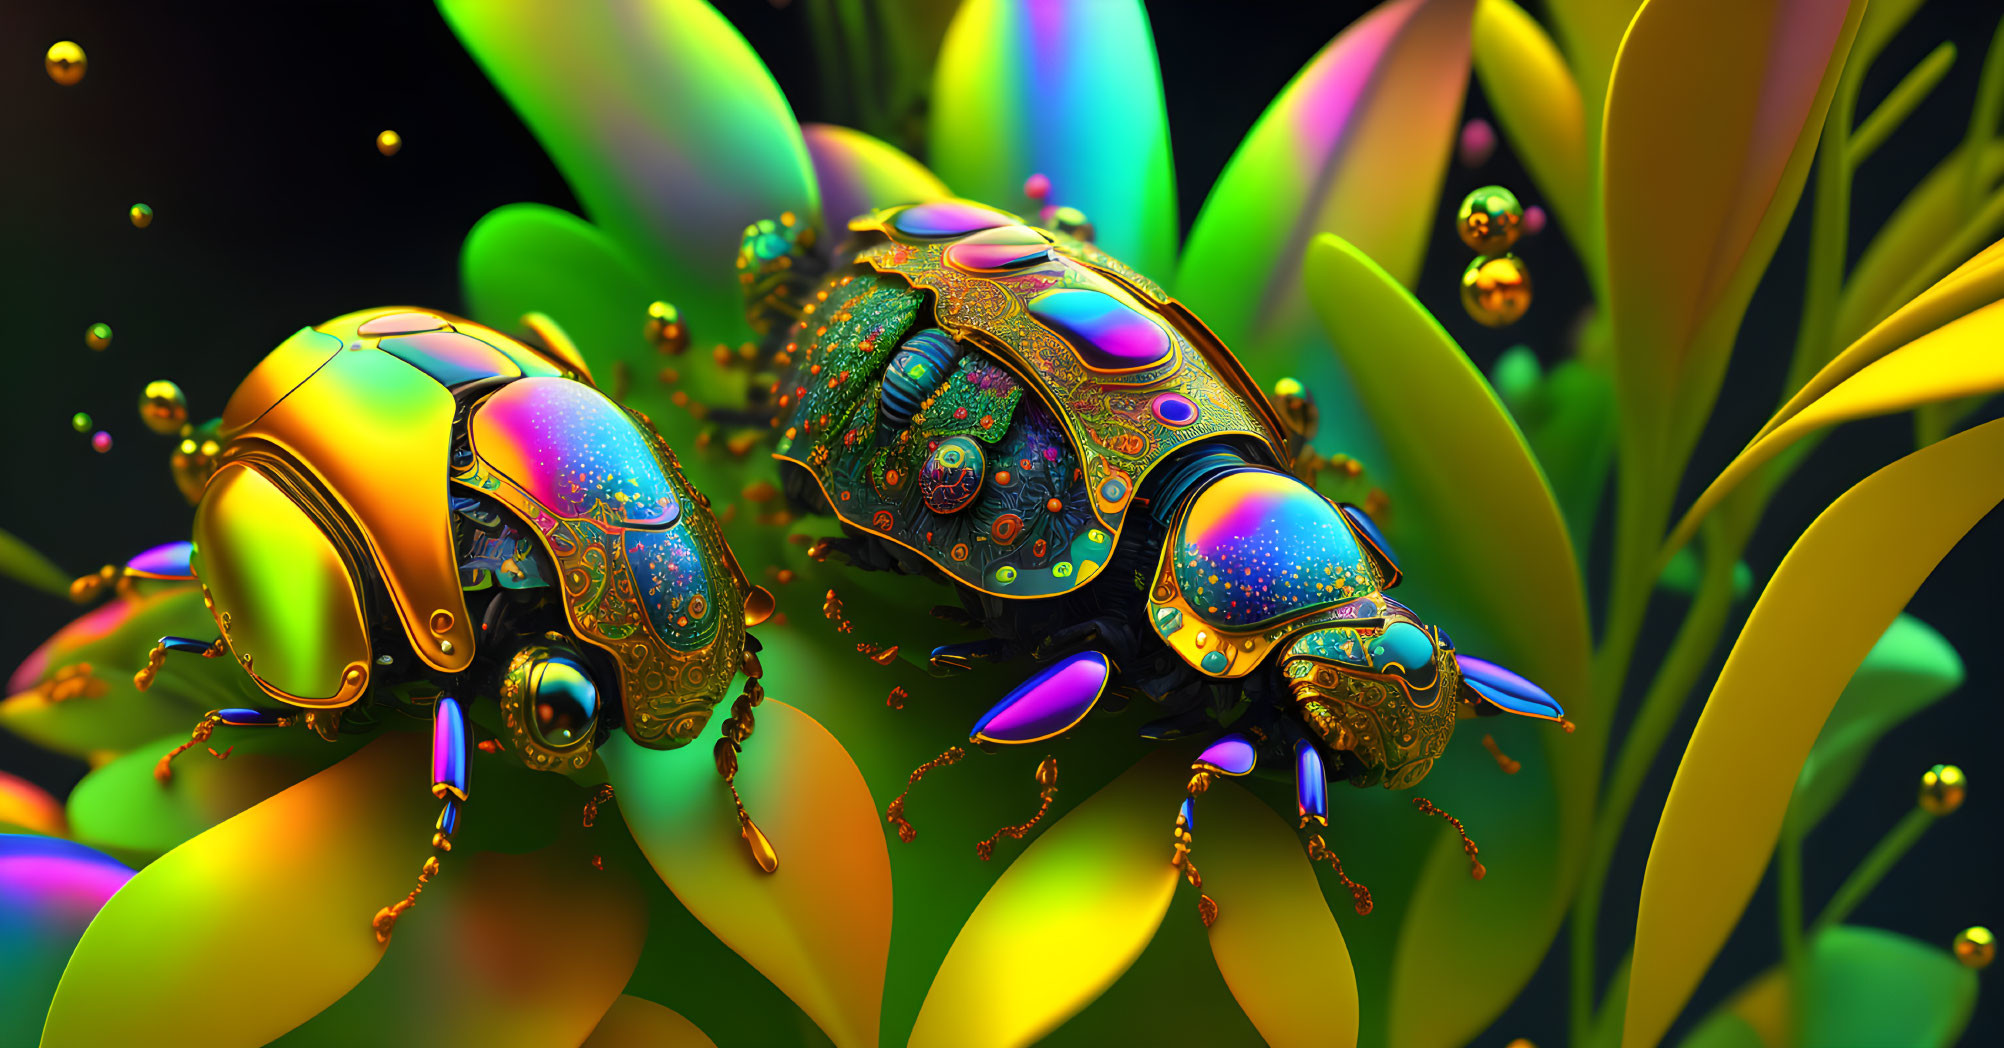 Colorful Digital Art: Ornate Beetle-like Insects on Neon Flora